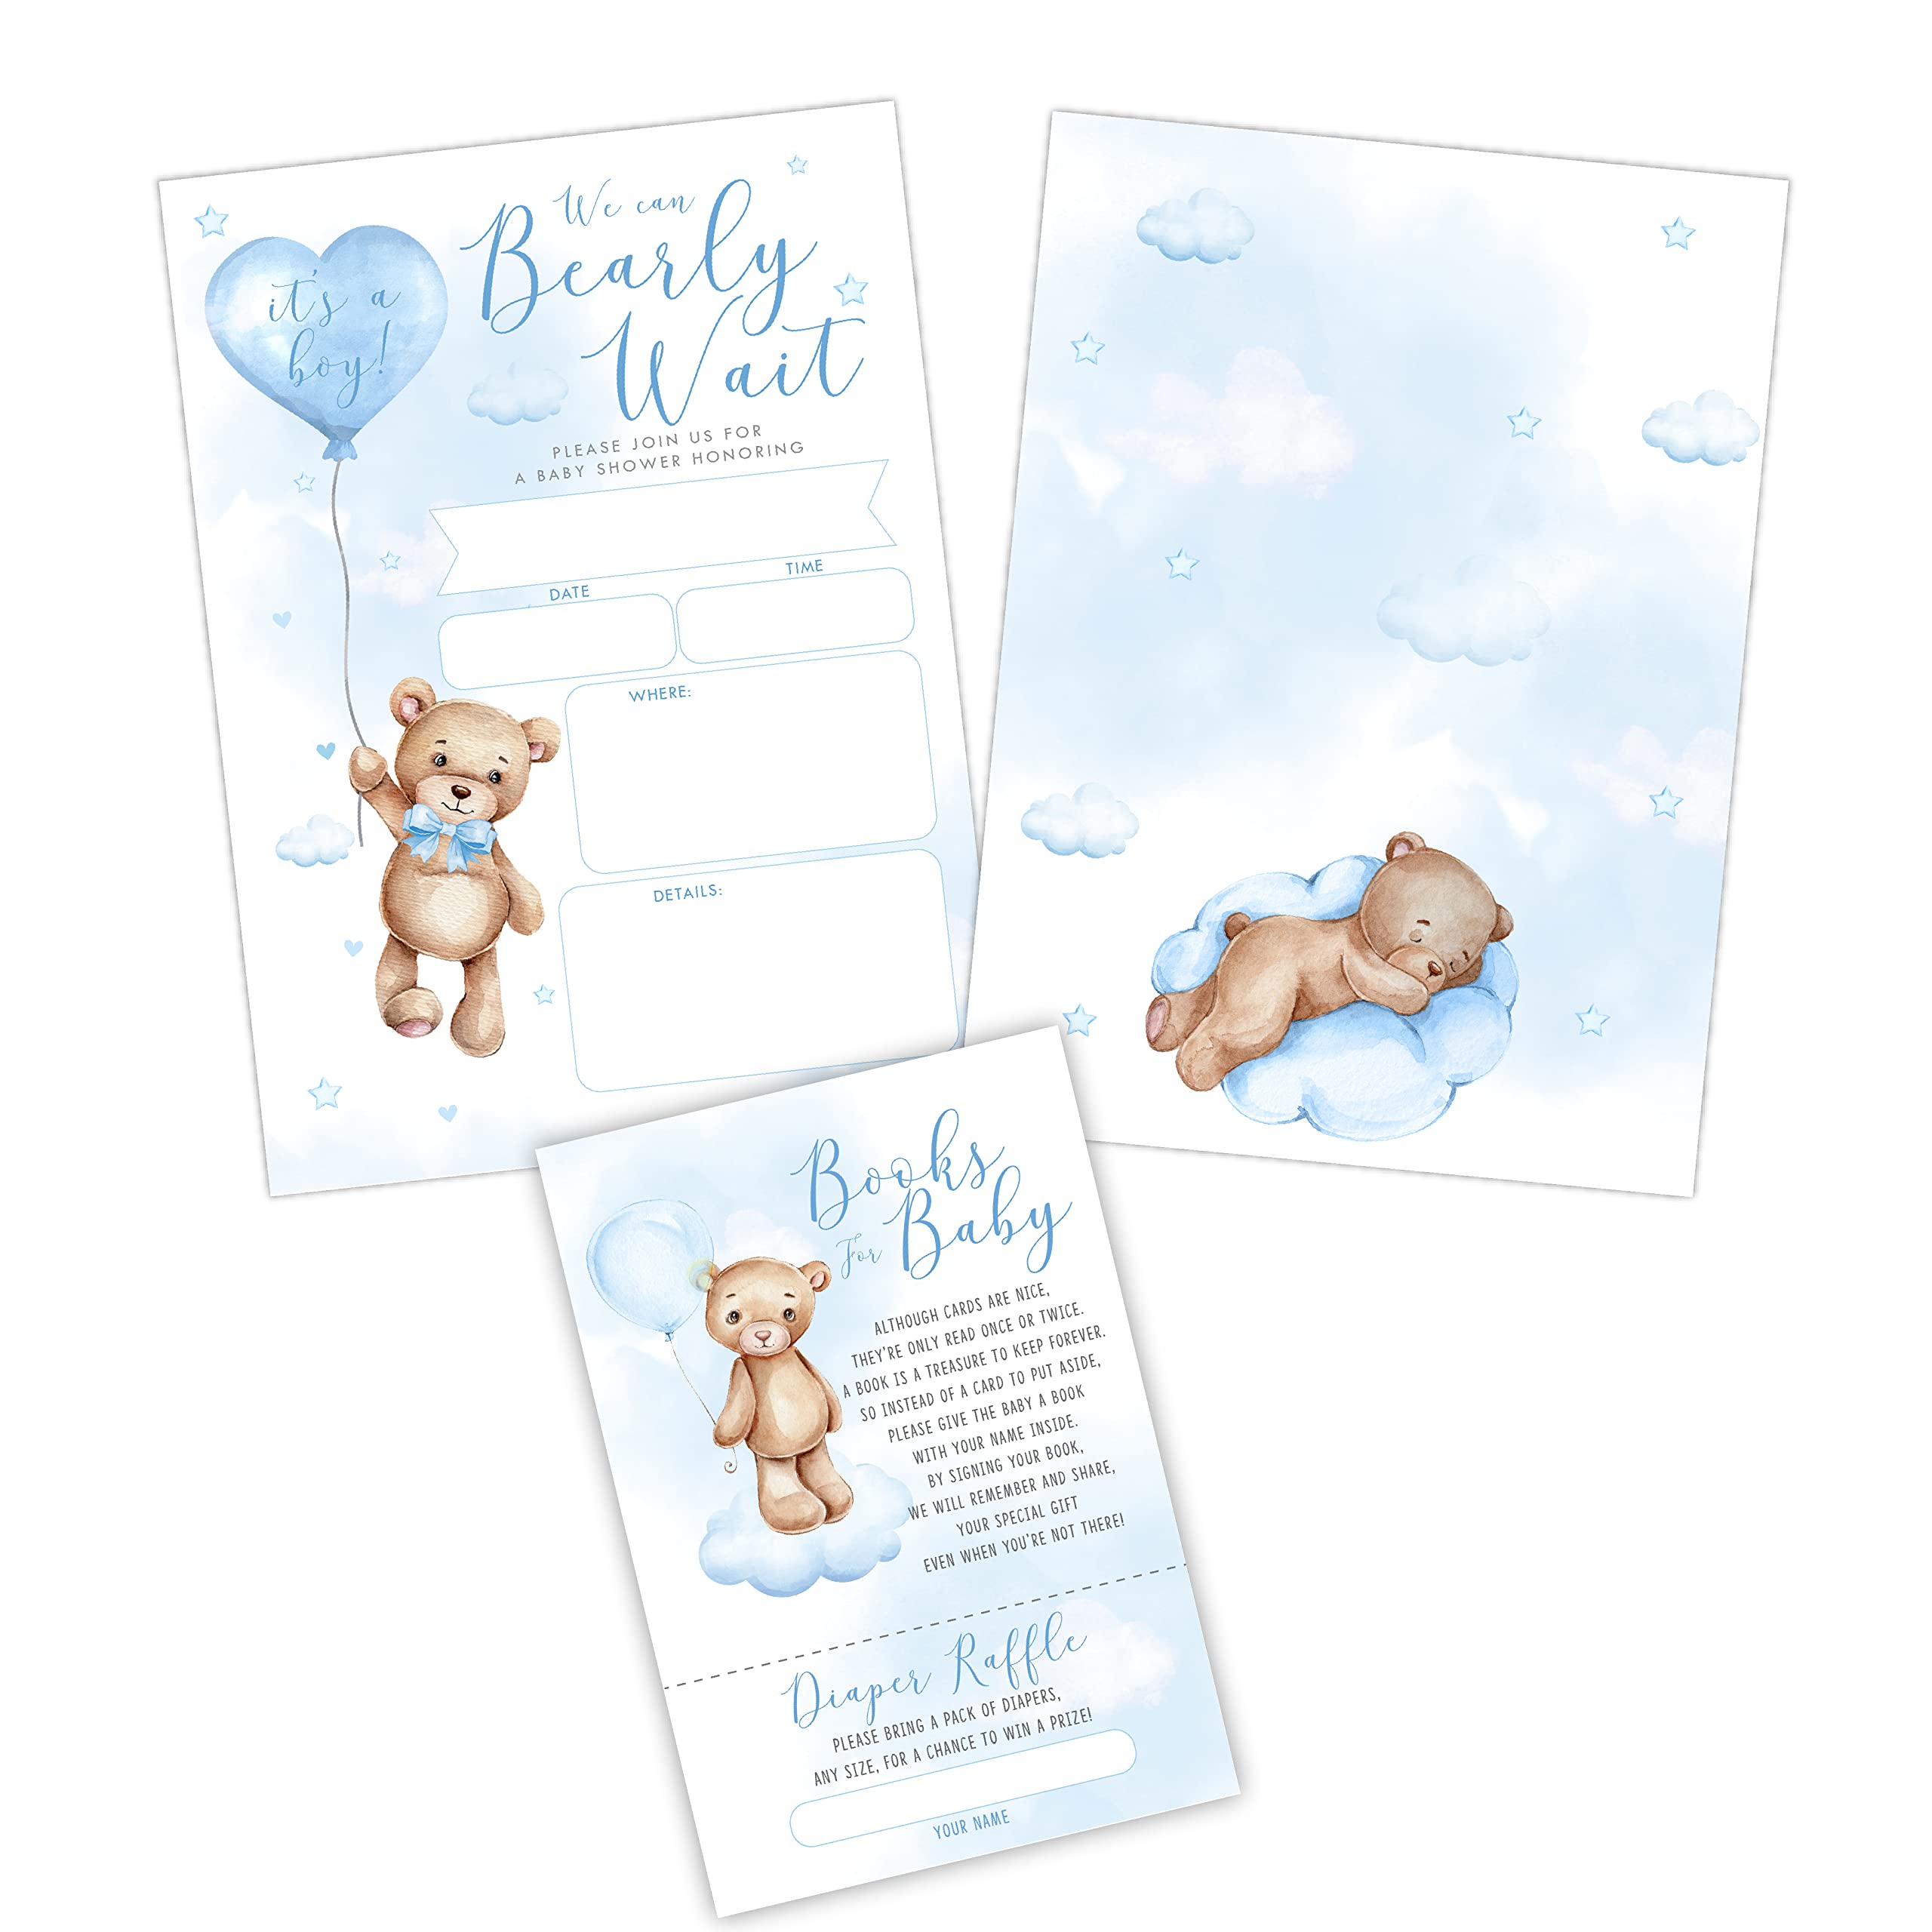 Bear Baby Shower Invitations with Book Request and Diaper Raffle Card, We Can Bearly Wait Teddy, Forest Animal, Baby Sprinkle, 20 Fill in Invites